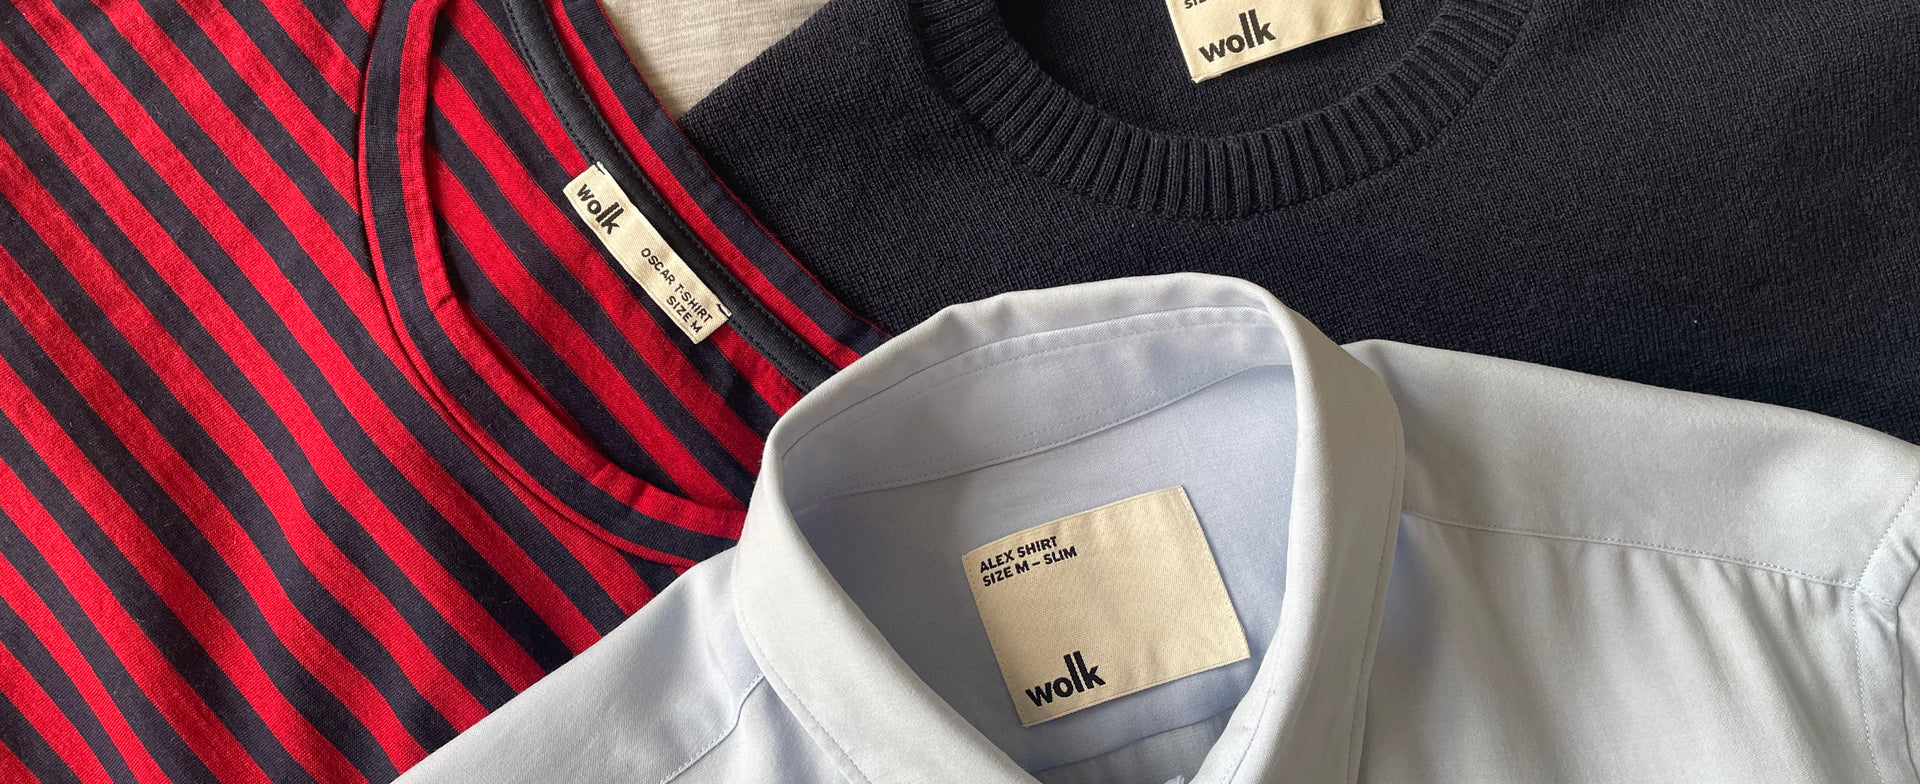 Care tips for merino wool apparel – Wolk